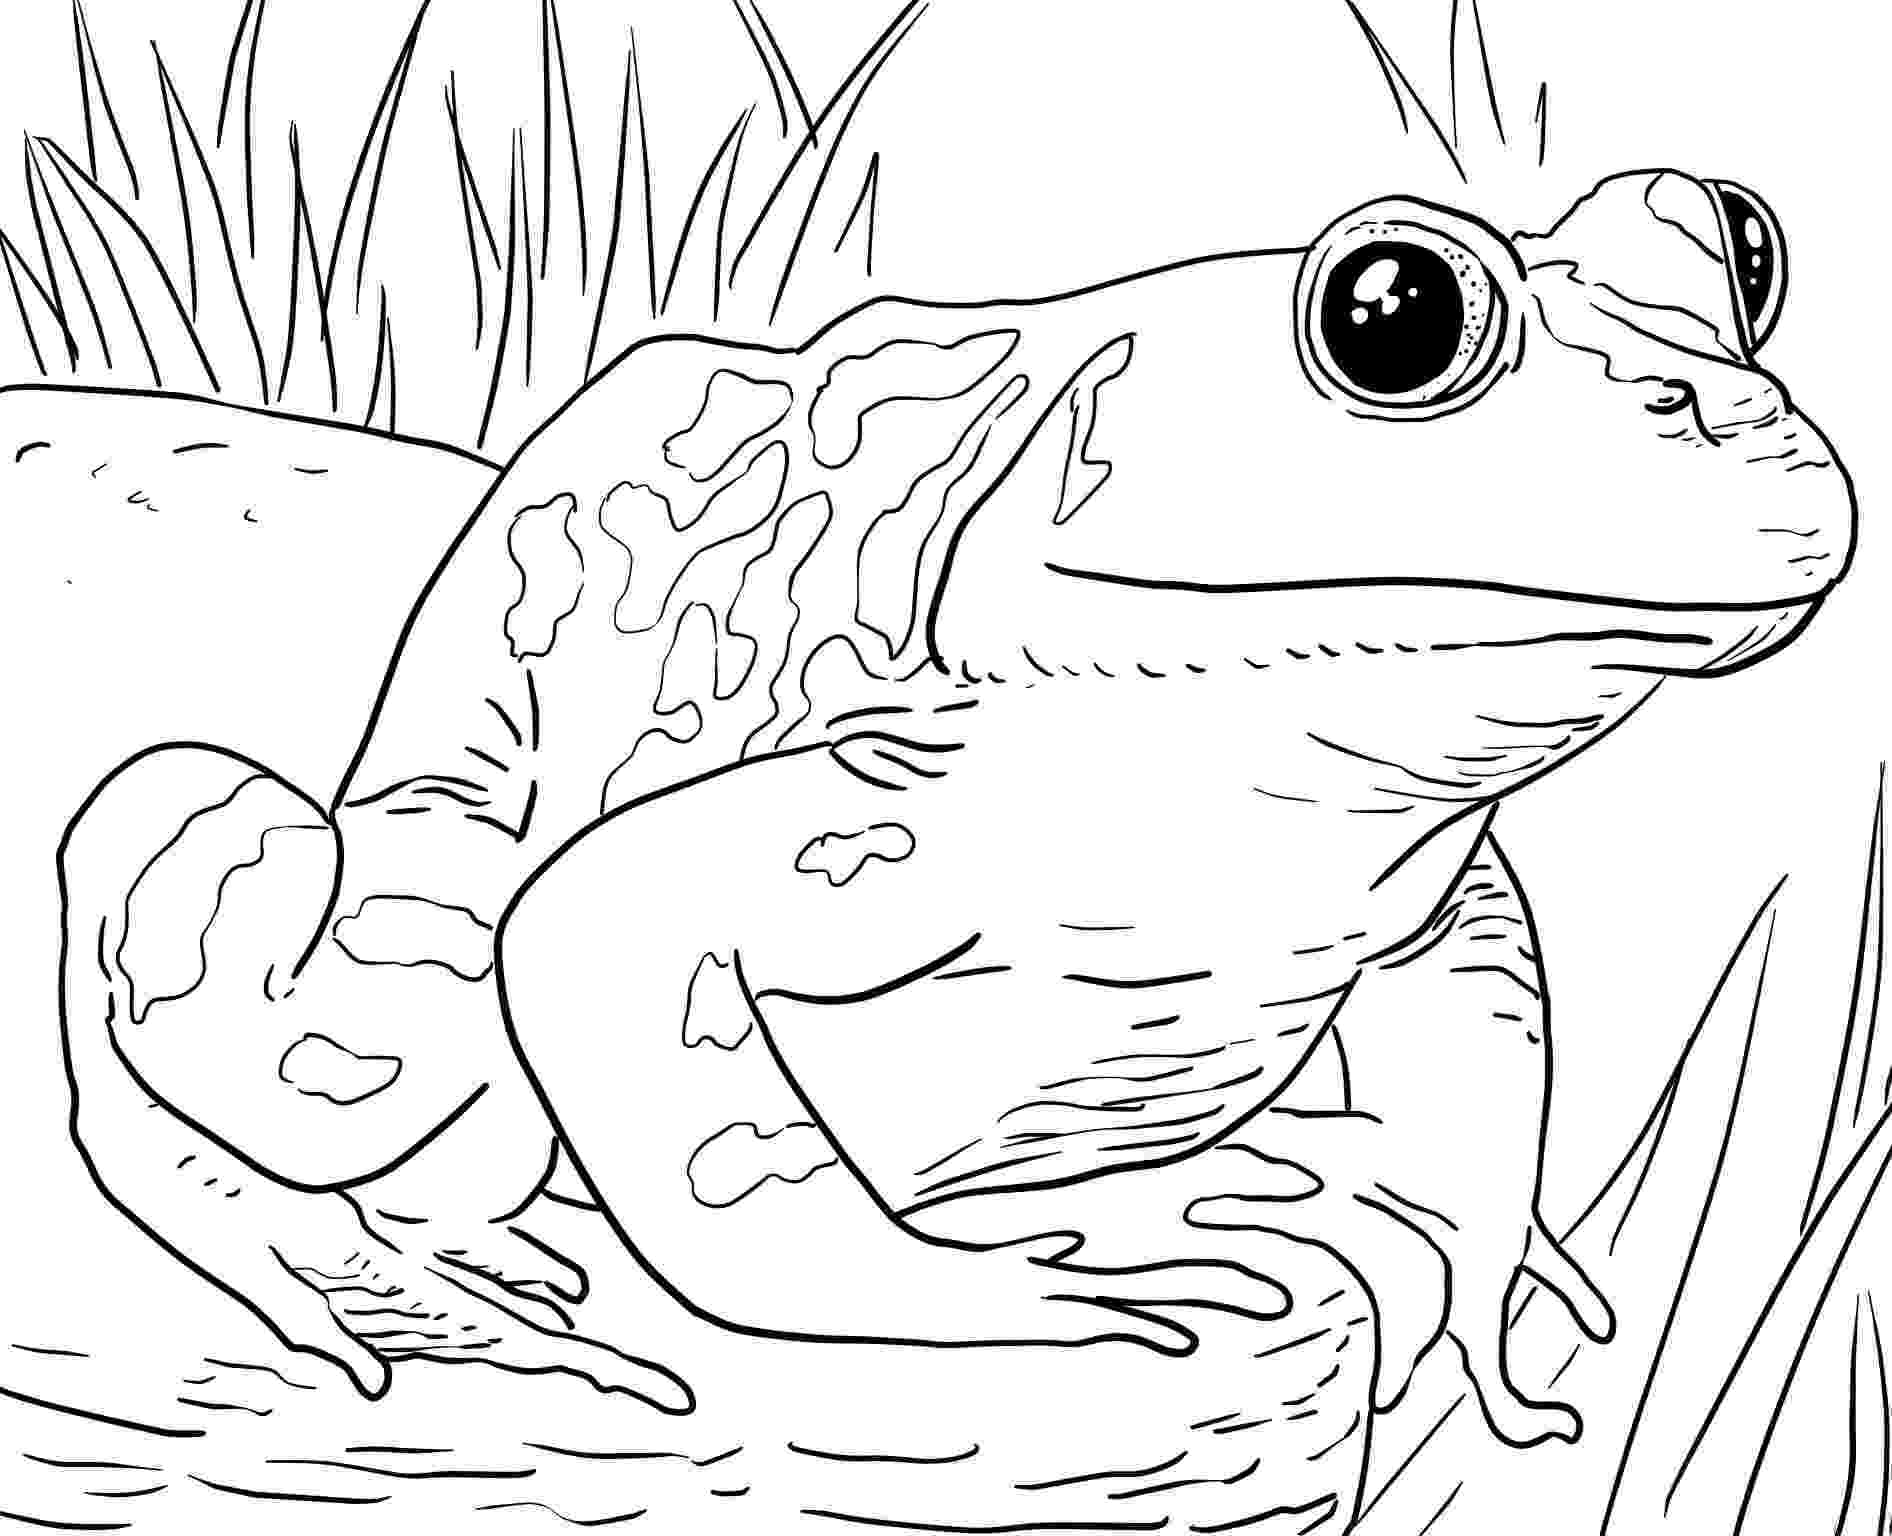 zoo coloring page zoo coloring pages getcoloringpagescom coloring page zoo 